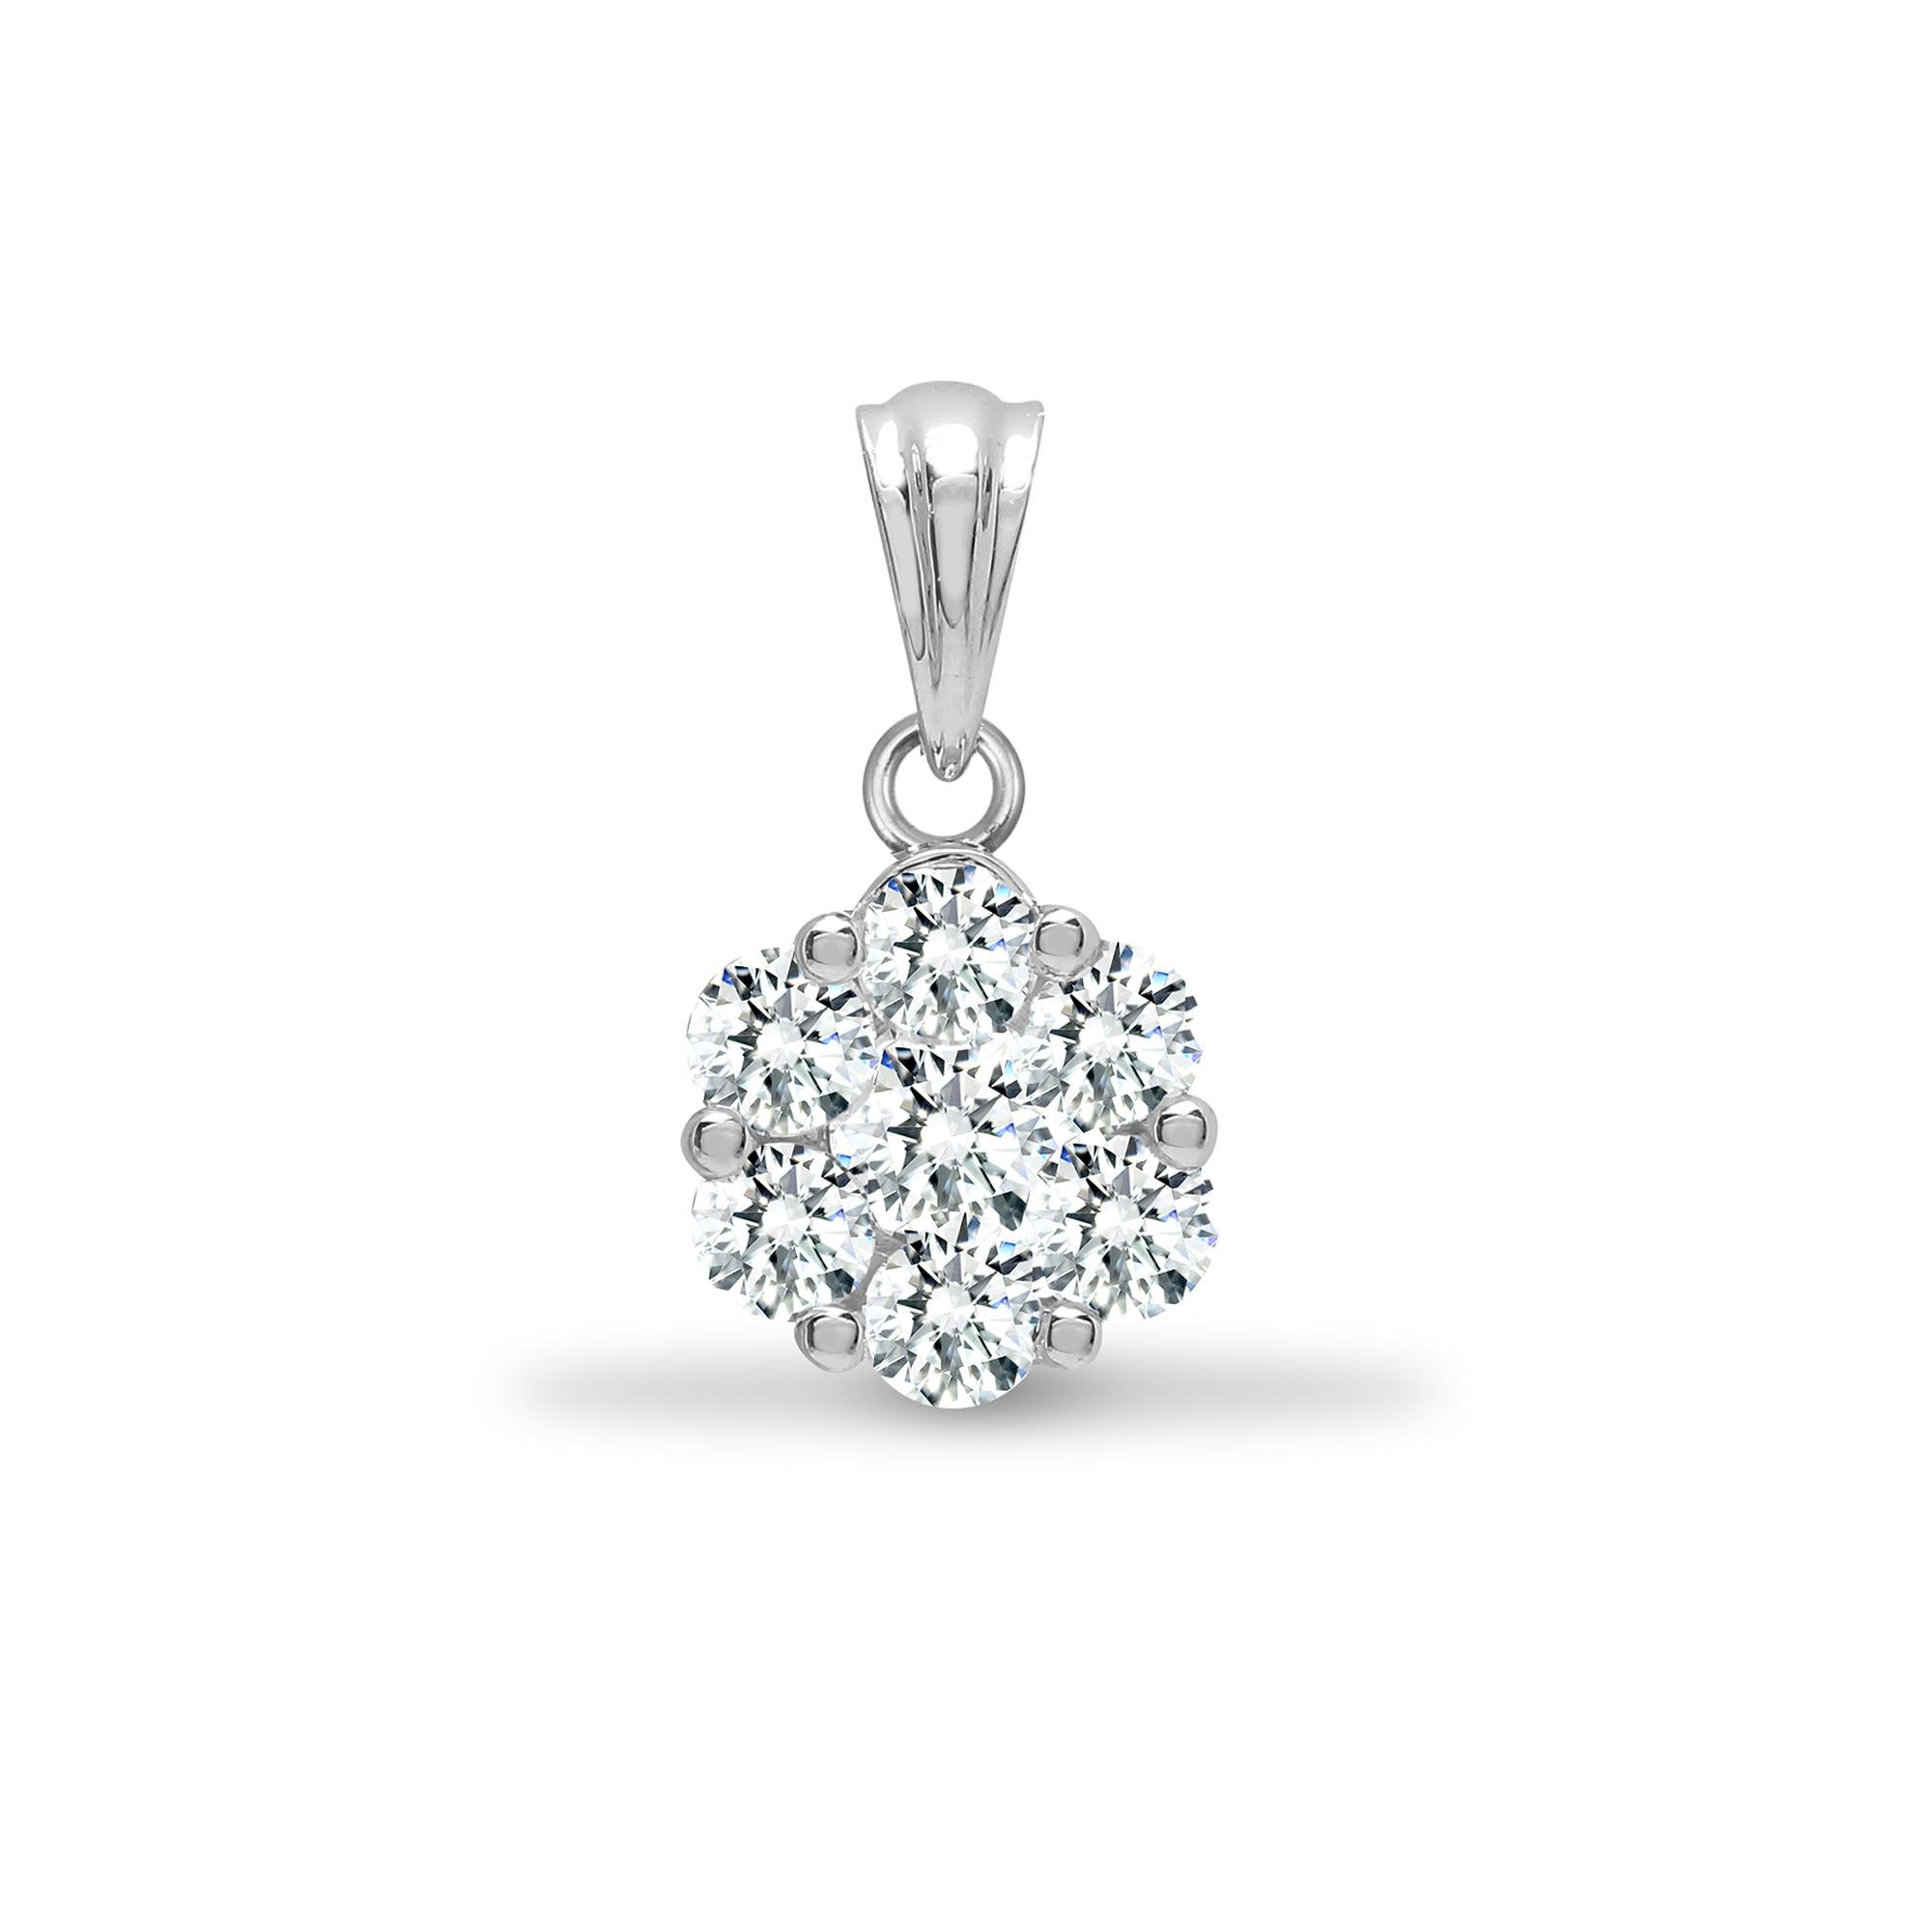 This Beautiful 0.50 Carat Flower design Cluster Diamond pendant features 7 round brilliant cut natural diamonds Color G/H Clarity SI1 Round White Diamonds. Comes with a stunning white gold necklace chain all set in 18 Karat white gold, suitable for